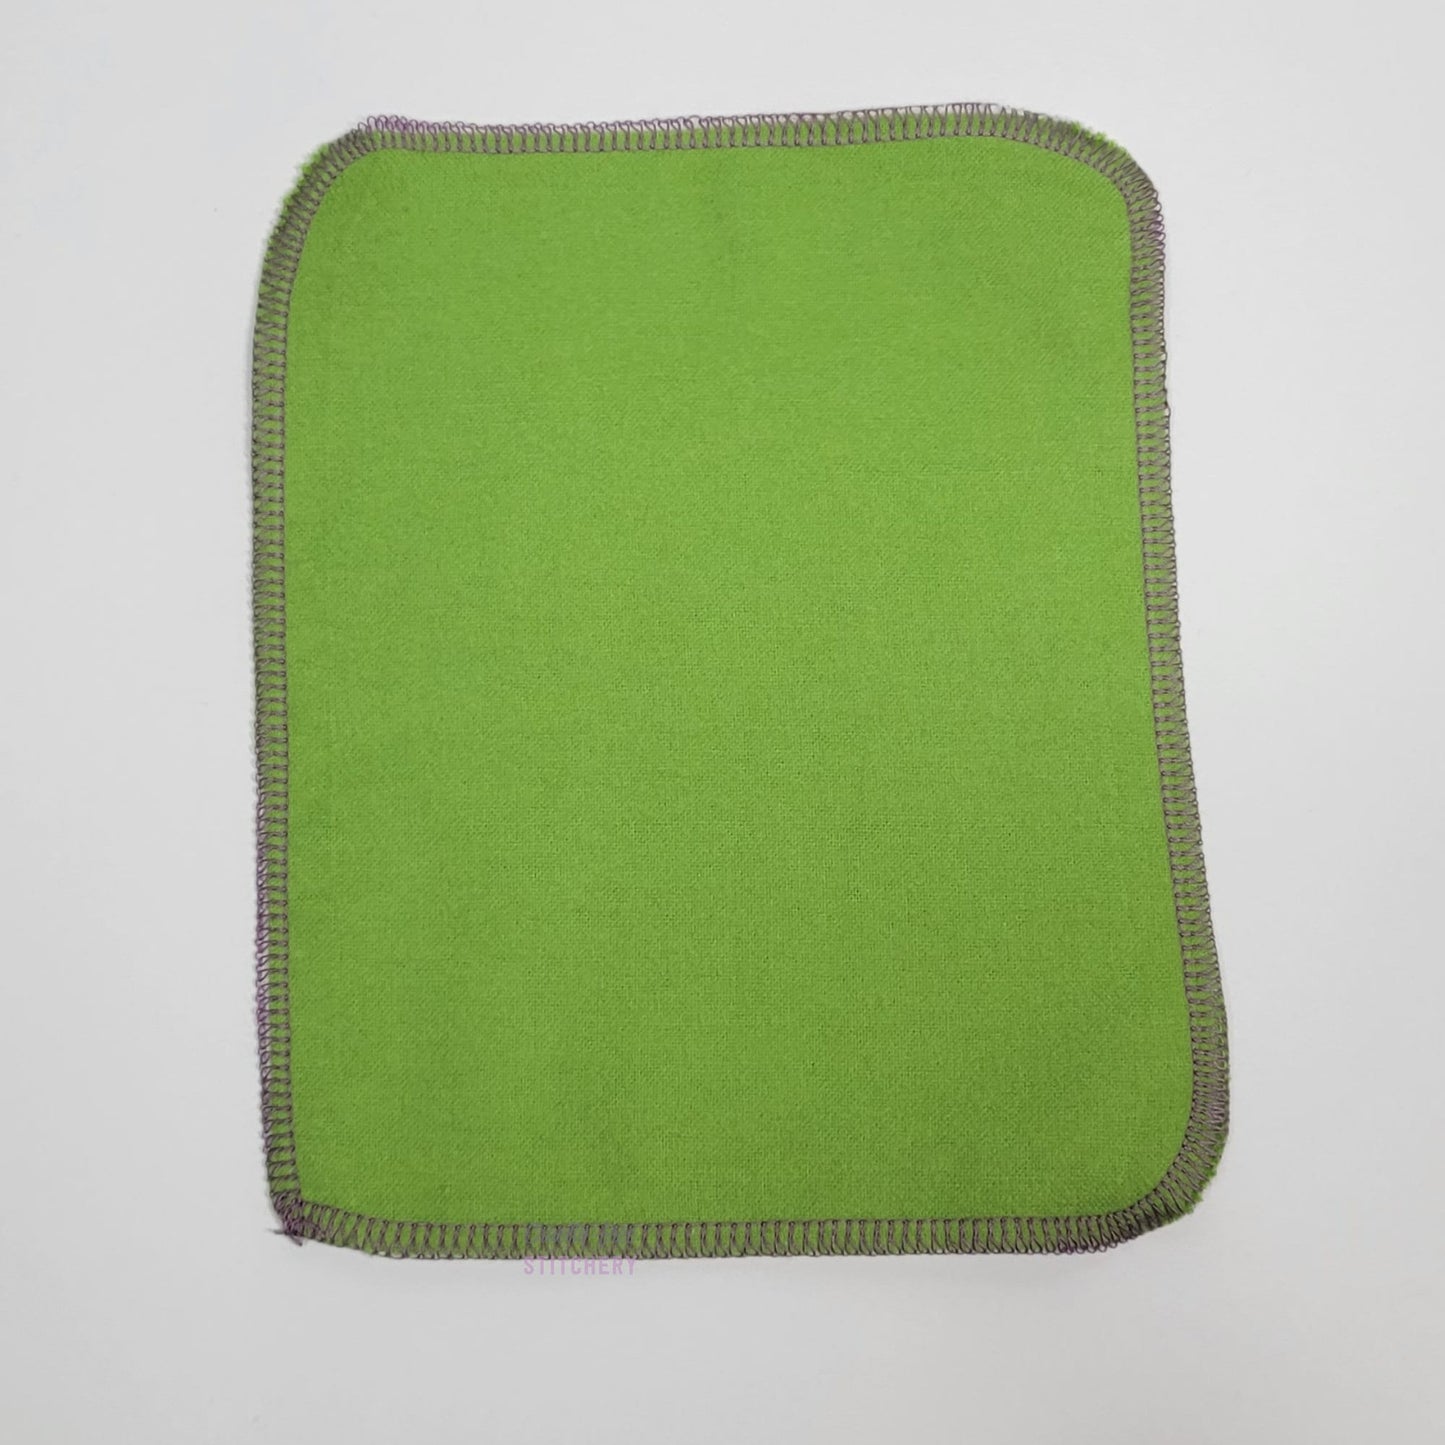 The back of a mouse cloth wipe, a light leaf green color.